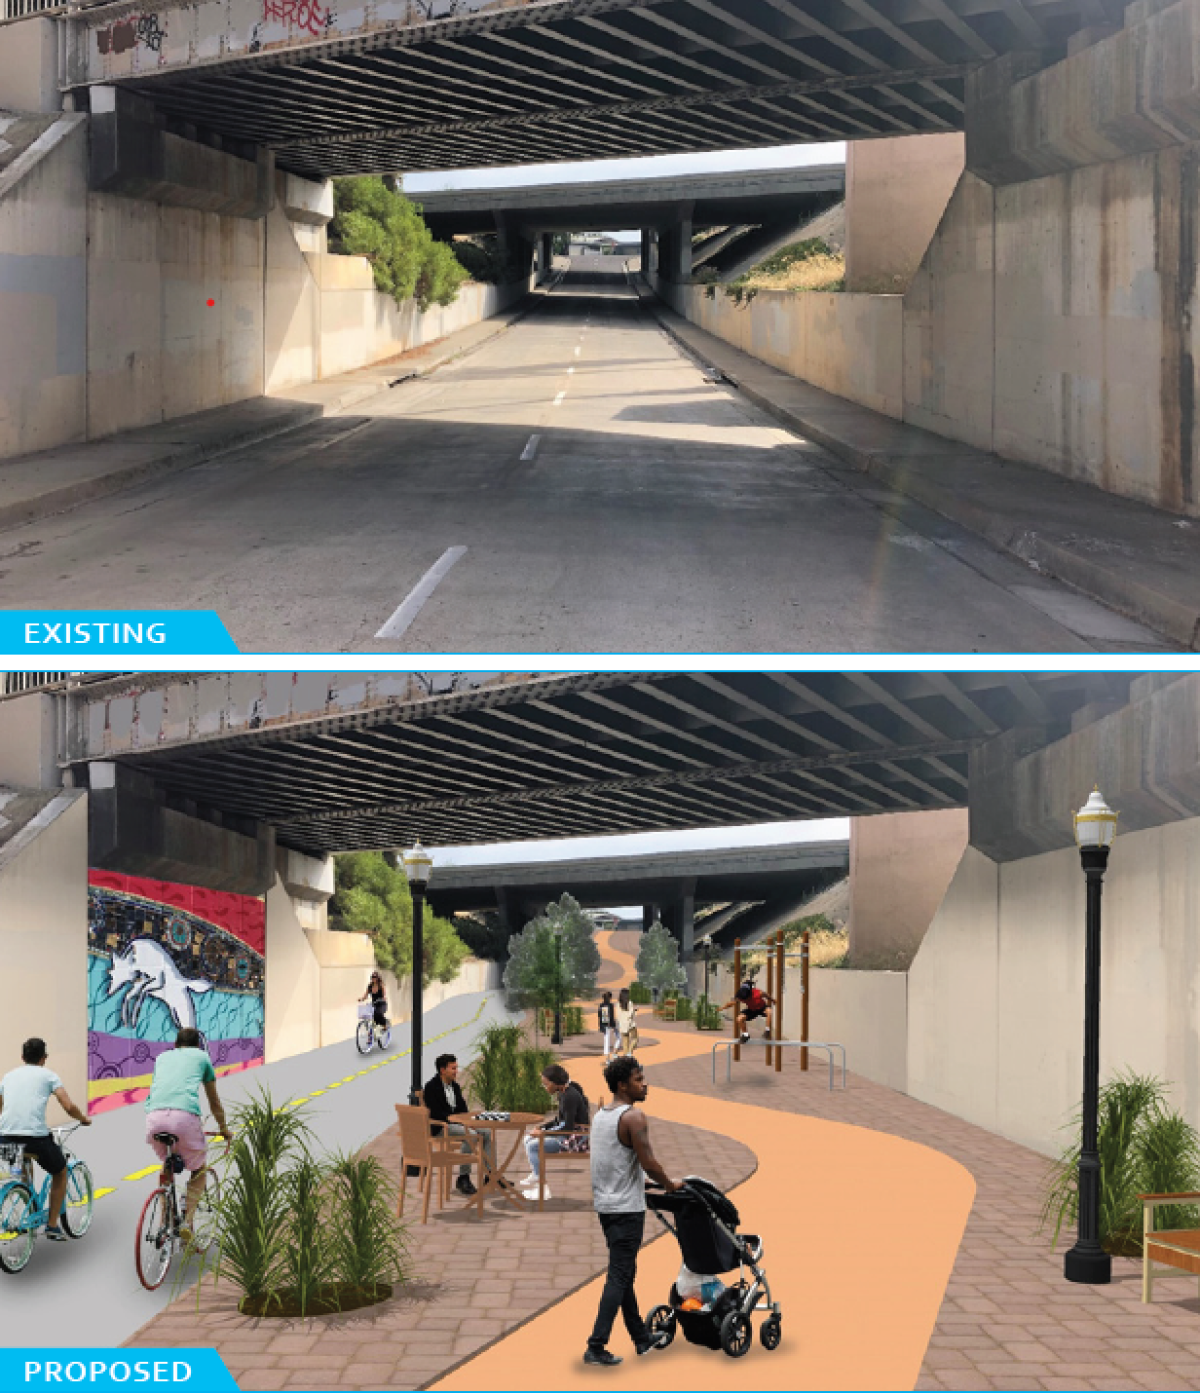 Bottom rendering of the proposed change along West 19th Street under Interstate 5 in National City.